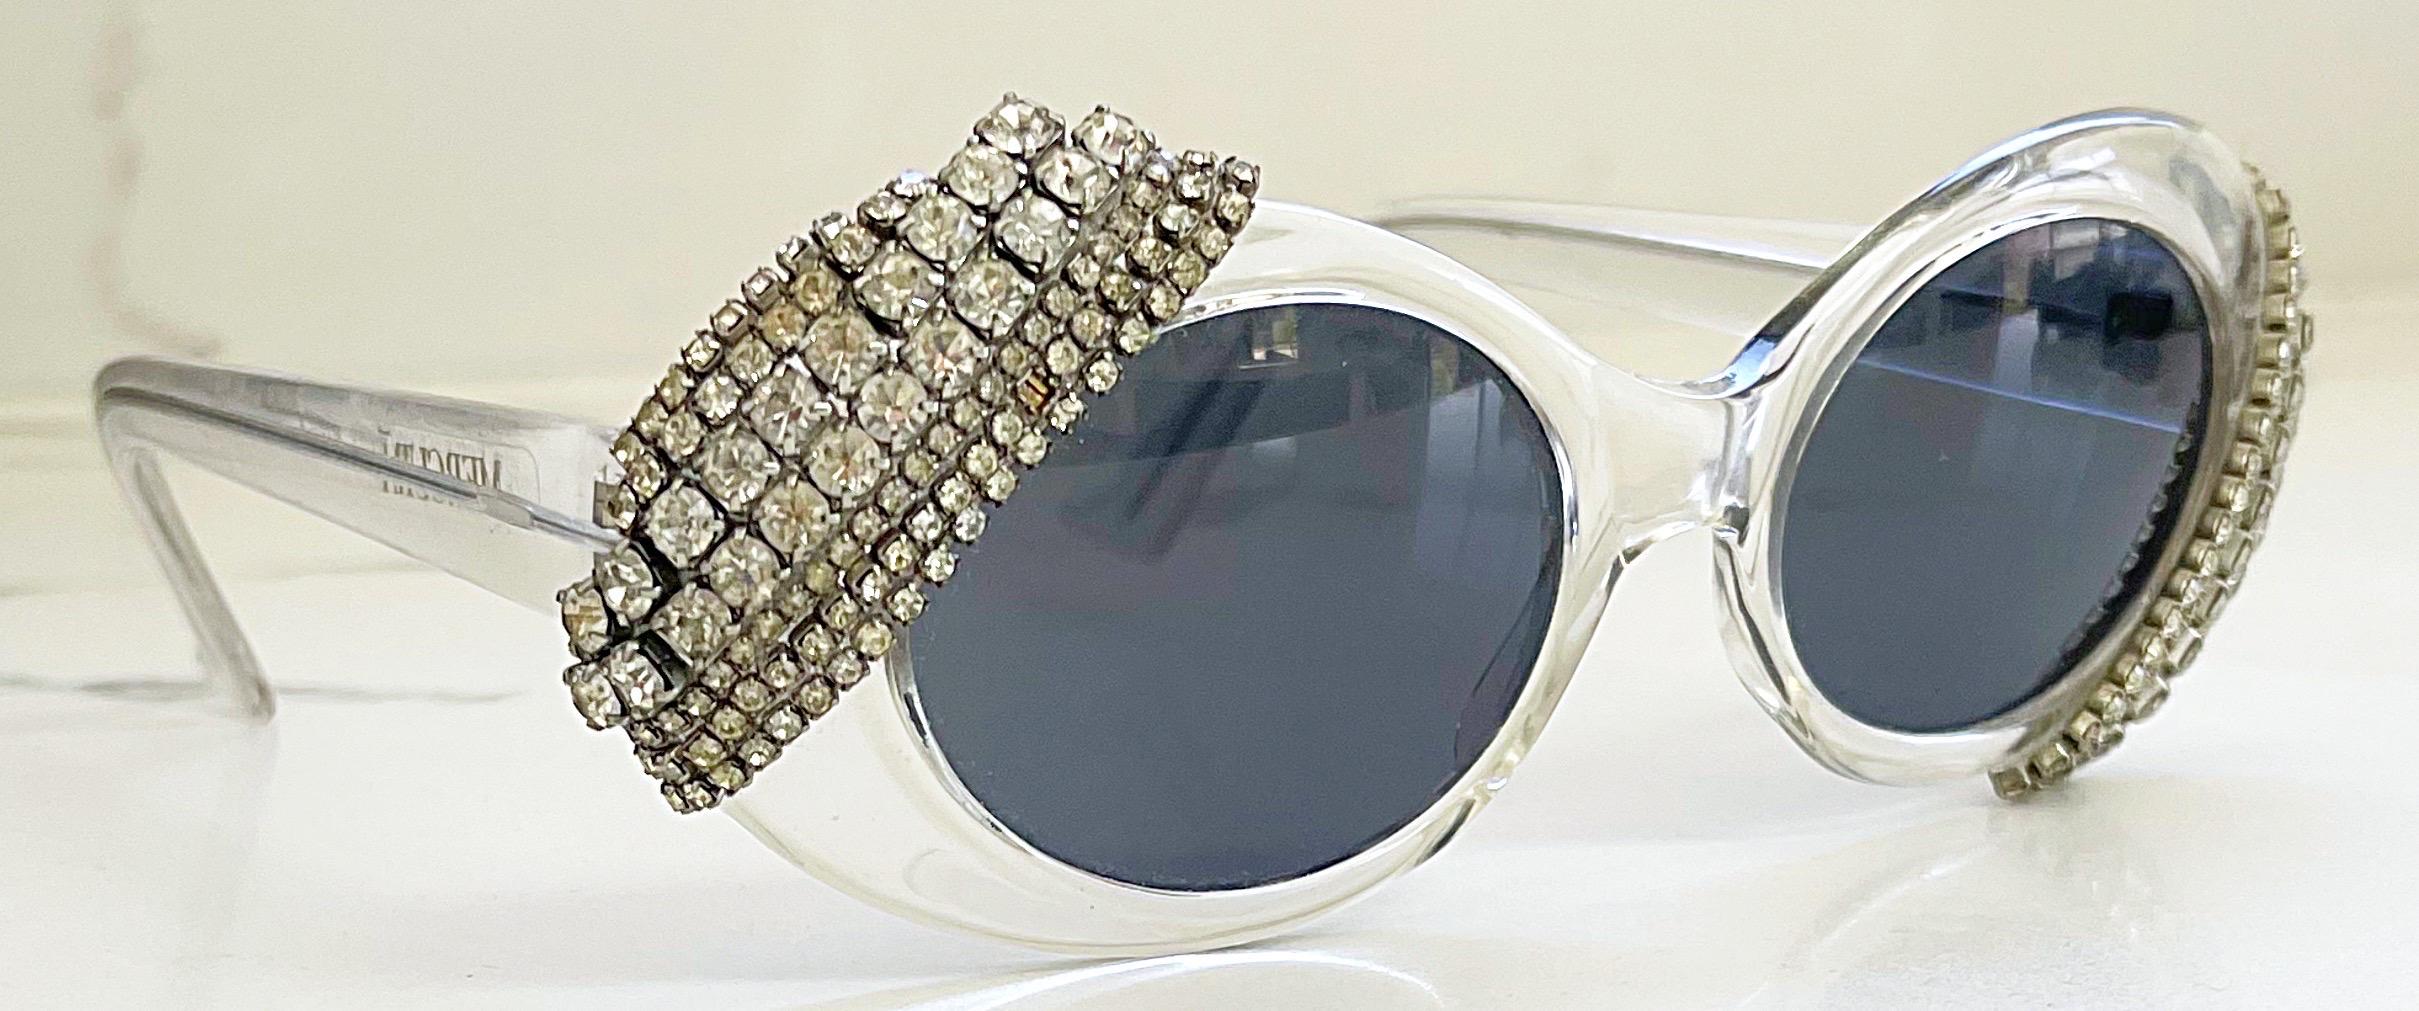 Vintage Mercura NYC Rihanna Clear + Rhinestone Jackie O 60s Style Sunglasses In Excellent Condition For Sale In San Diego, CA